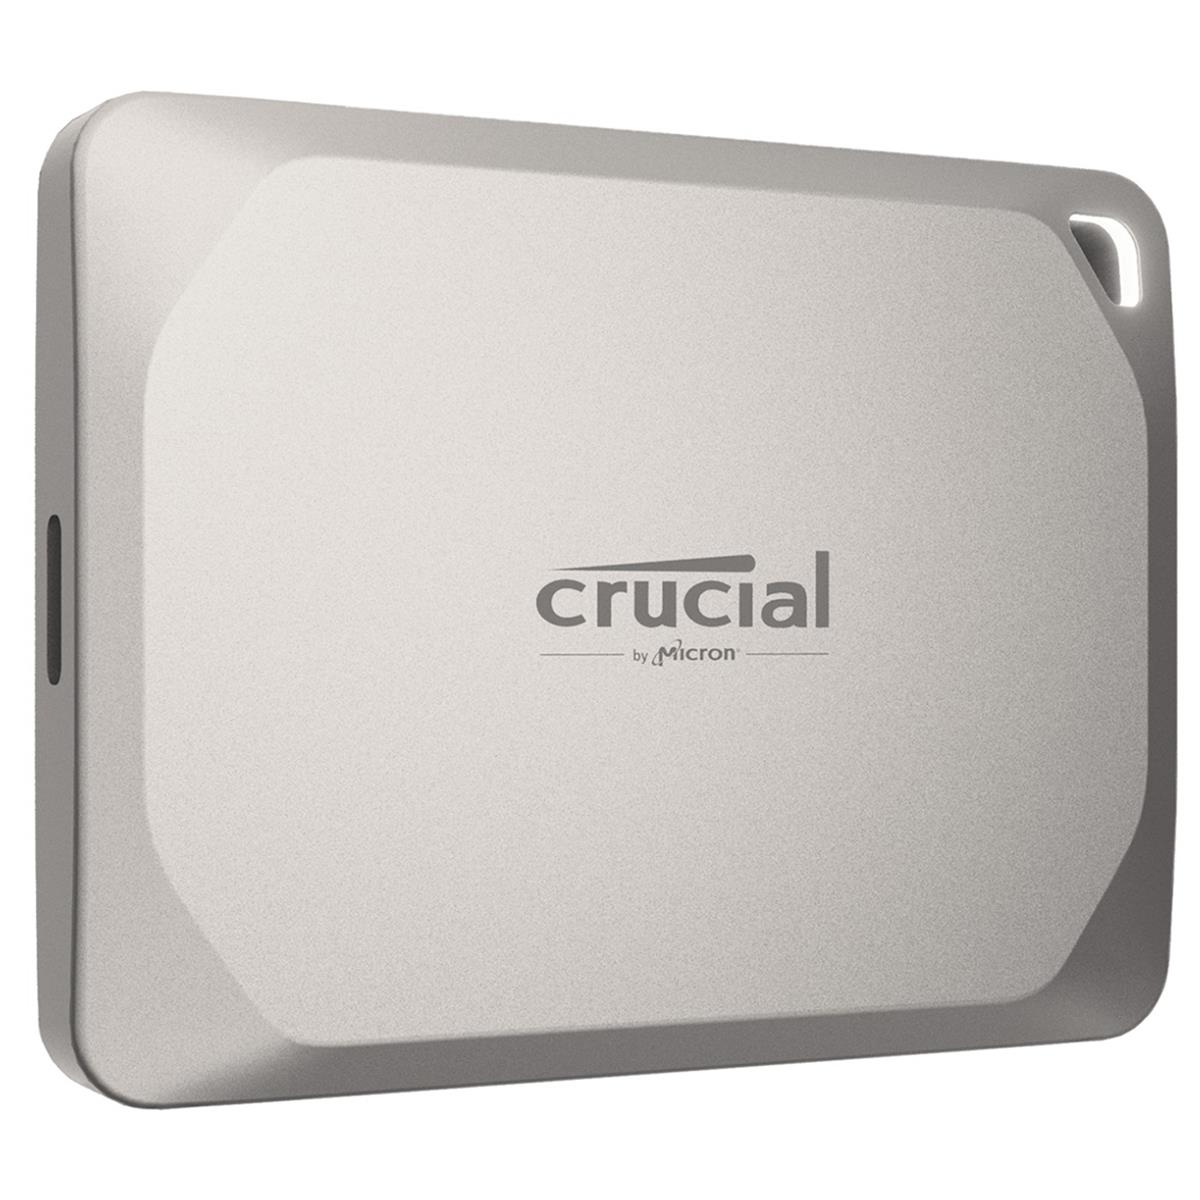 Image of Crucial X9 Pro 1TB USB 3.2 Gen 2 Type-C Portable External SSD for Apple Mac